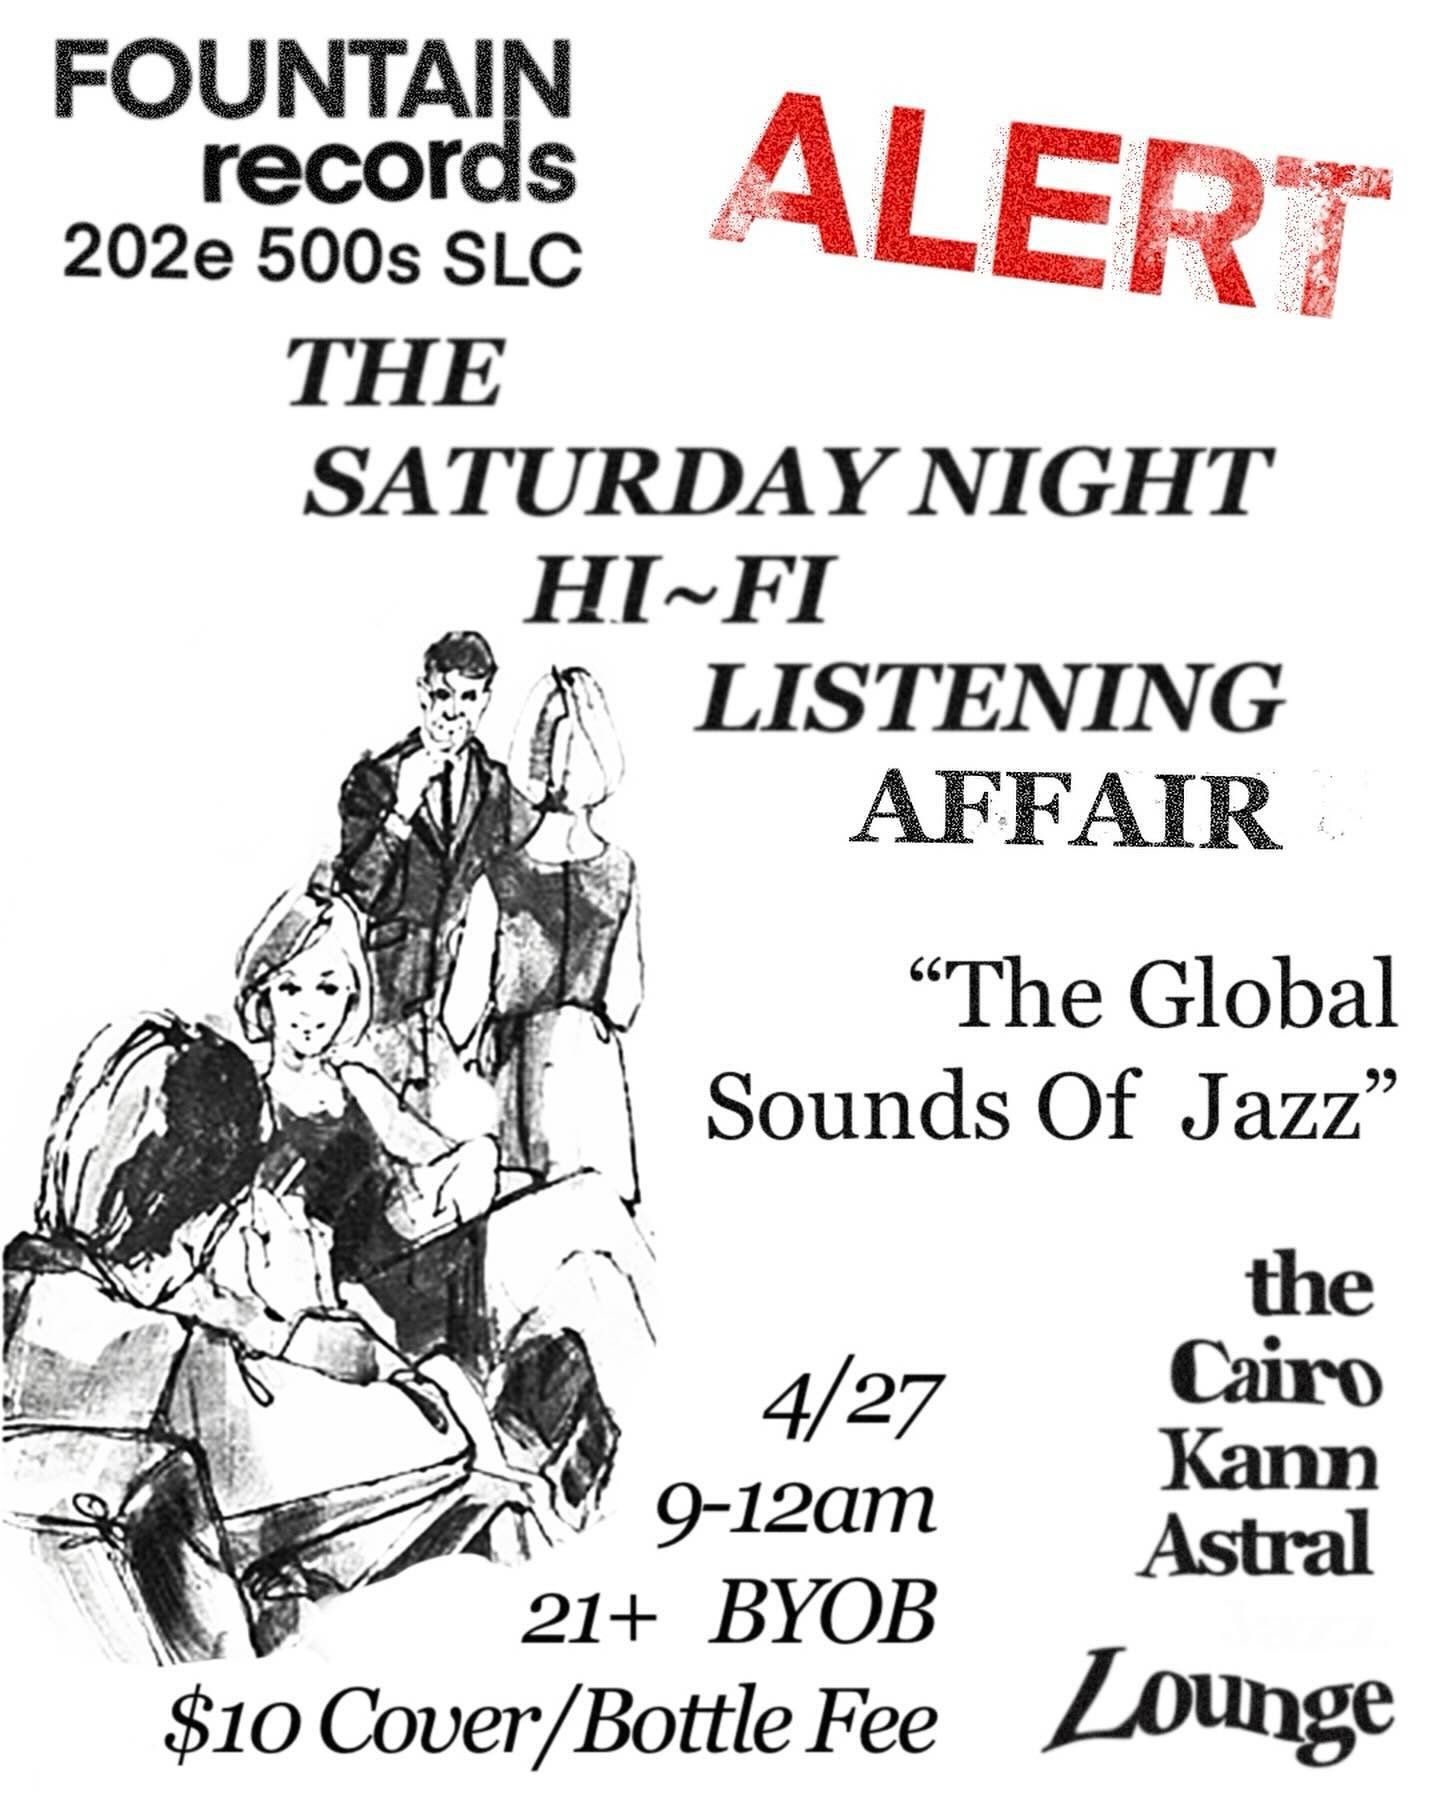 Starting a new Saturday night speak easy event &quot; The Hi-Fi Listening Affair&quot;.
After hours downstairs in The Cairo Kann Lounge with our hi-fi vinyl system. BYO drinks, 21+. $10 cover/ bottle fee allows you to bring your best JAPANESE WHISKEY